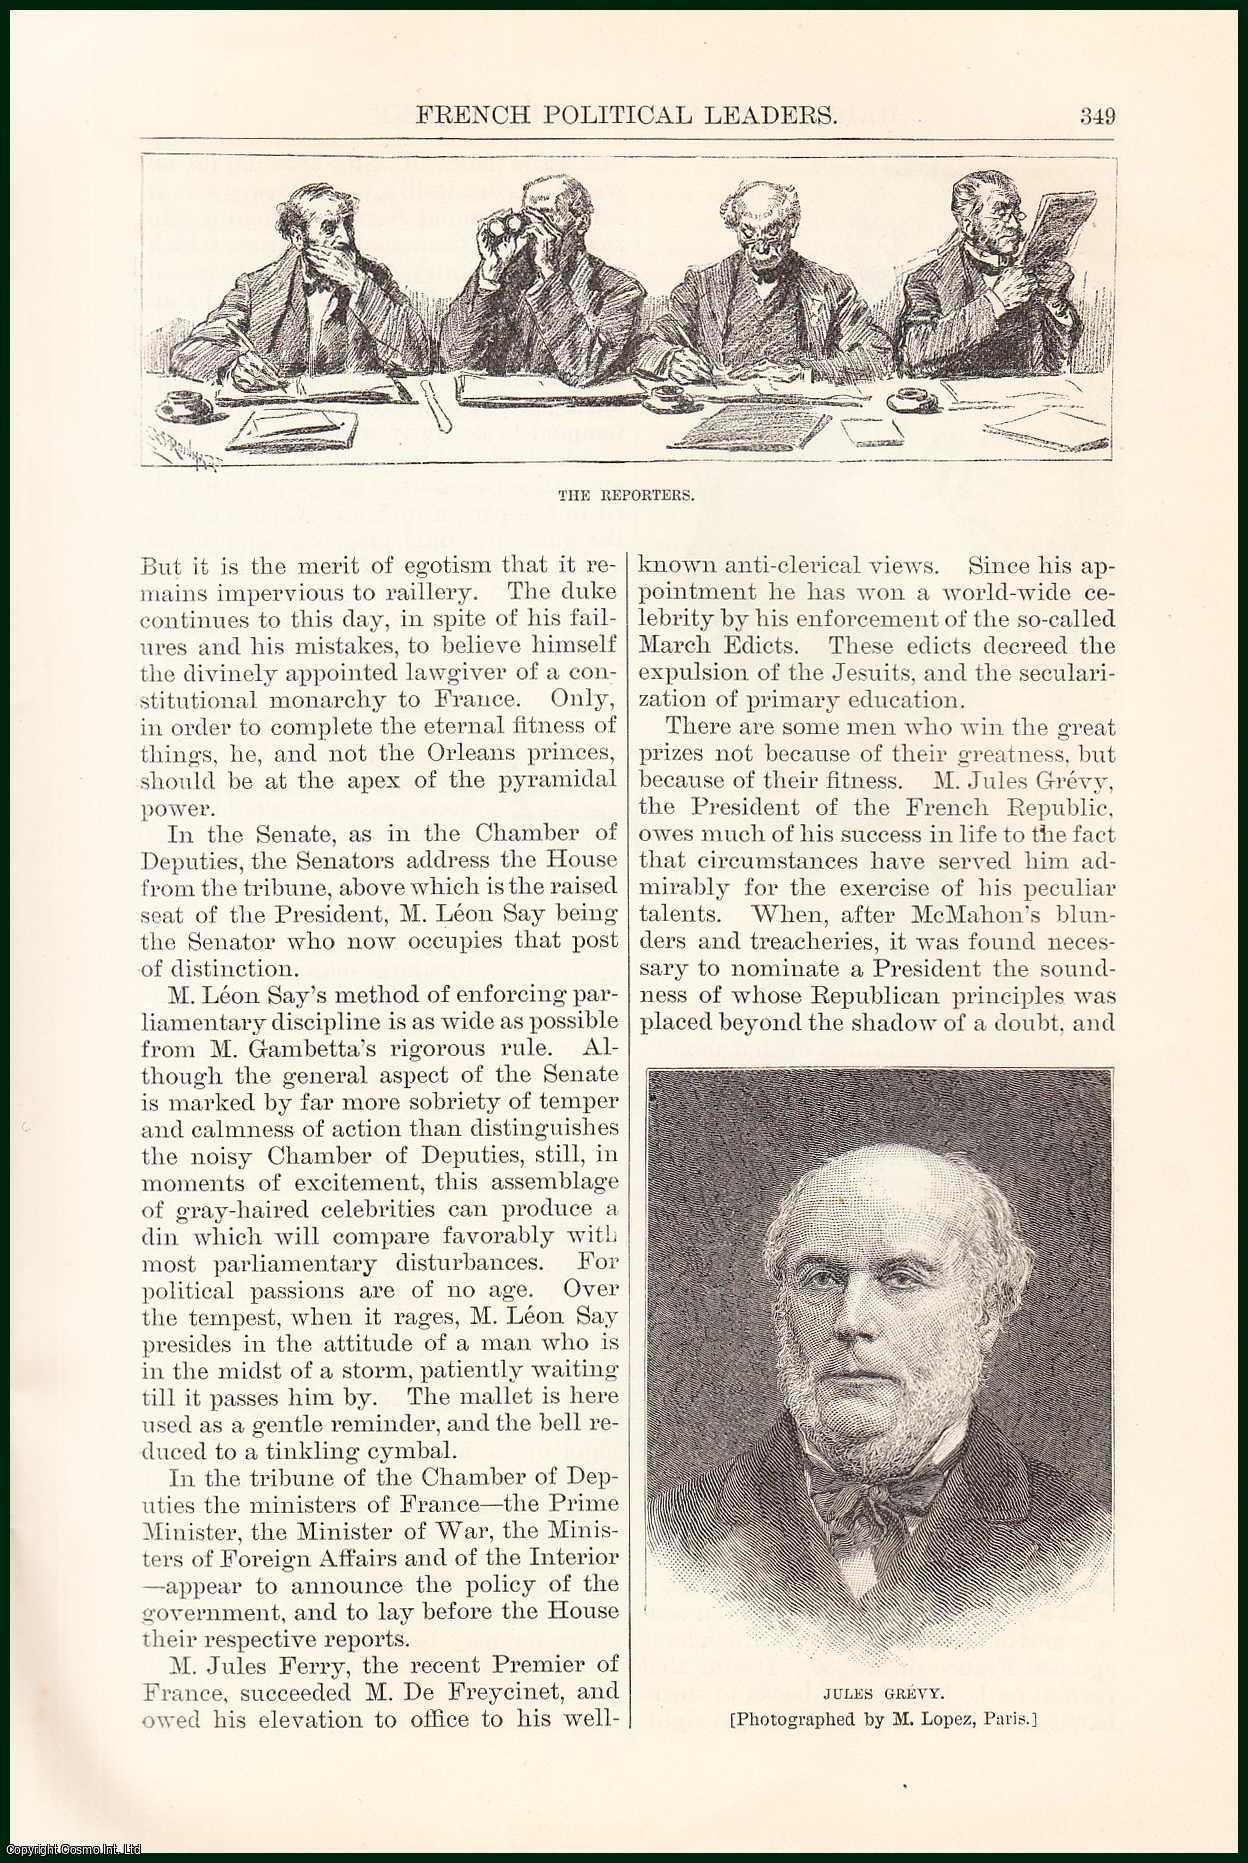 A. Bowman Blake - Jules Ferry ; Georges-Benjamin Clemenceau ; Jules Simon ; Jules Grevy & others : French Political Leaders. An uncommon original article from the Harper's Monthly Magazine, 1882.